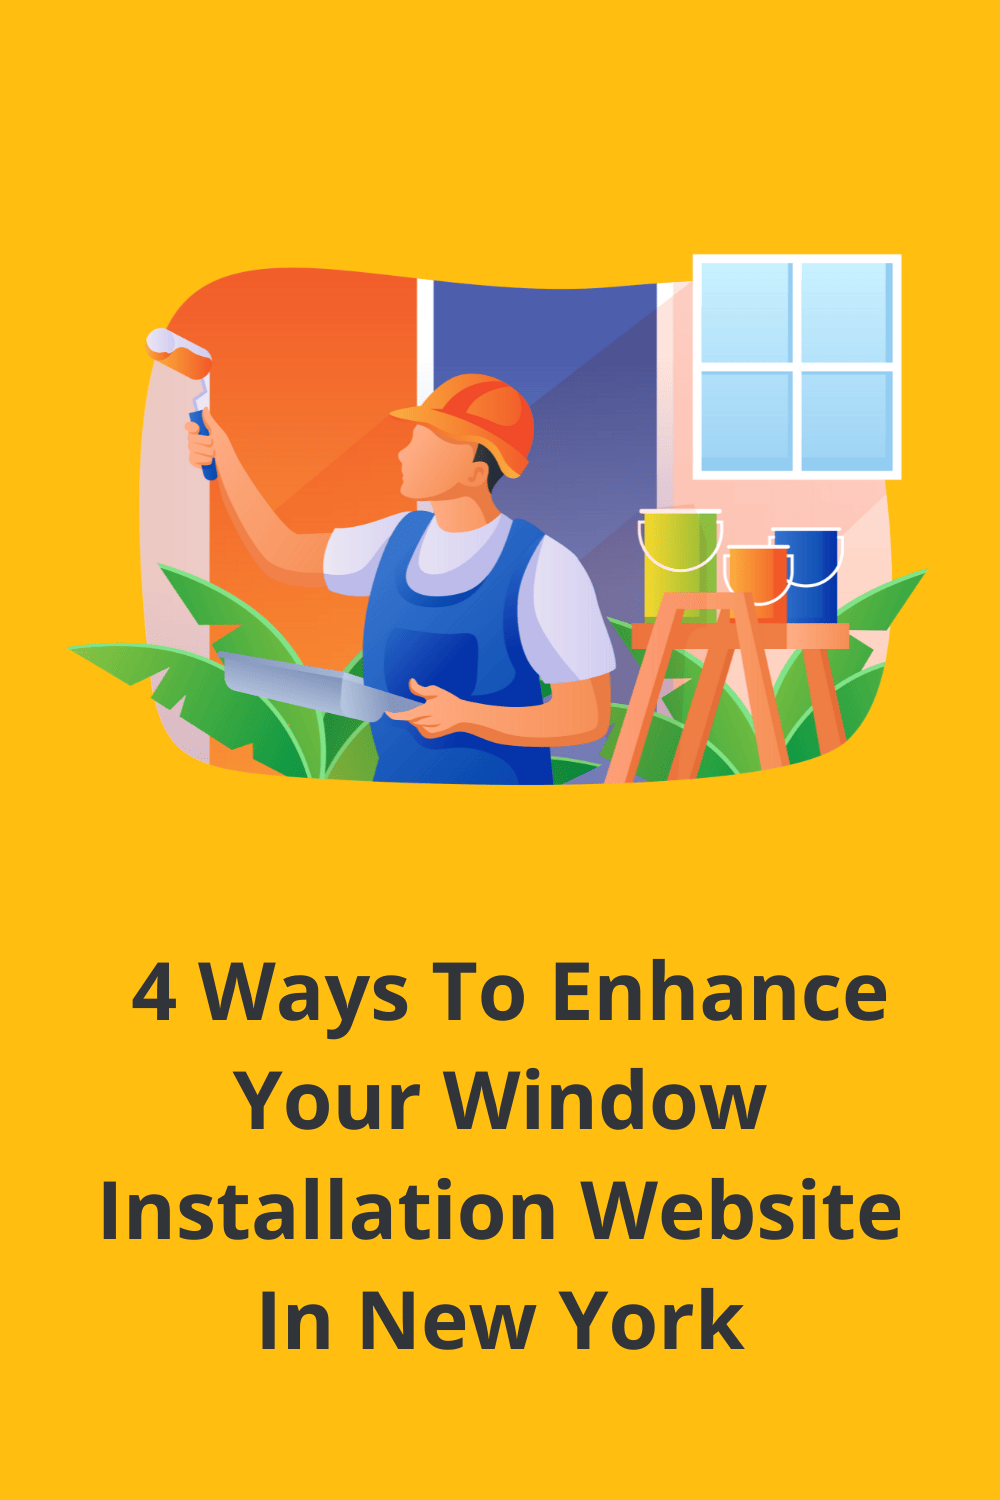 Enhancing your Window Installation Website can help you create an online presence. It makes it easier for clients to find you online. Below are some ways that can help you enhance your window installation business. via @scopedesign